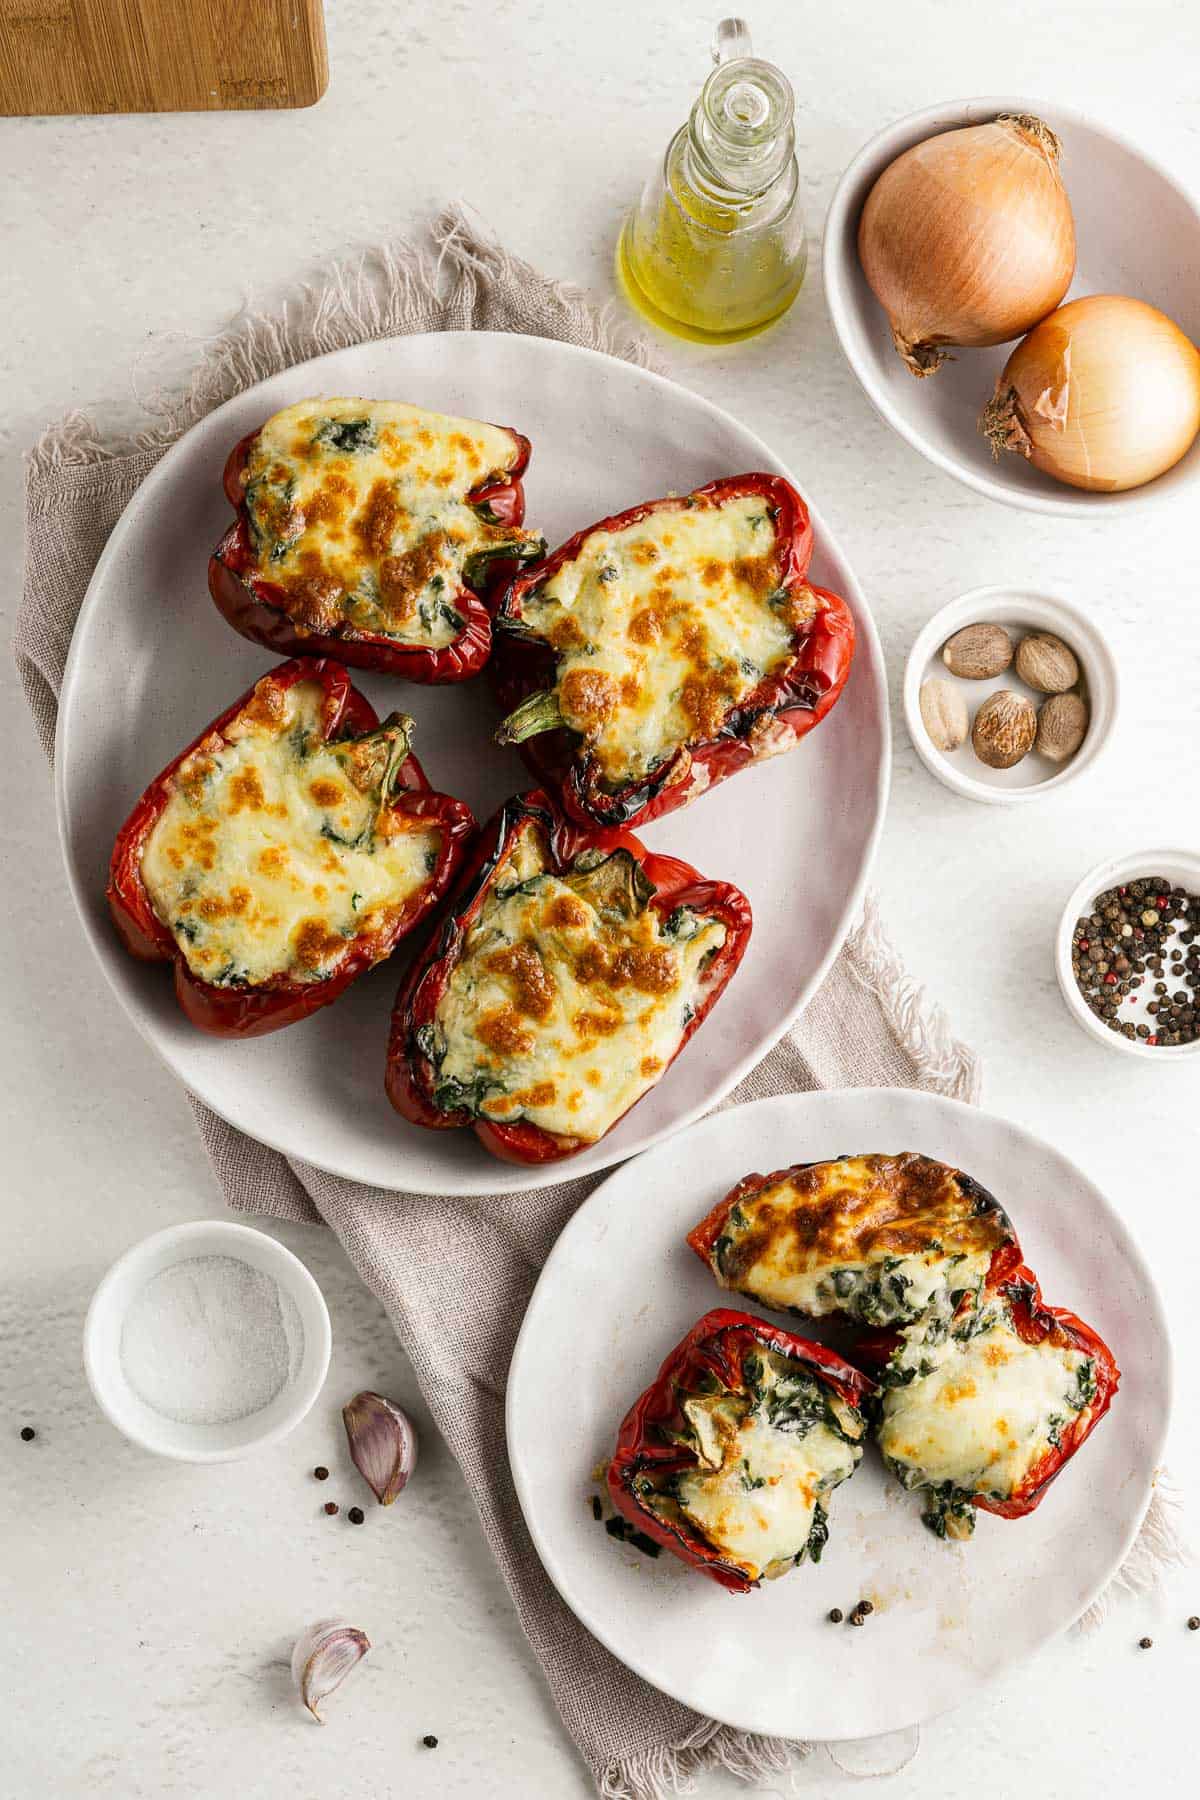 baked red bell peppers, stuffed with cheese, spinach, onion, and garlic